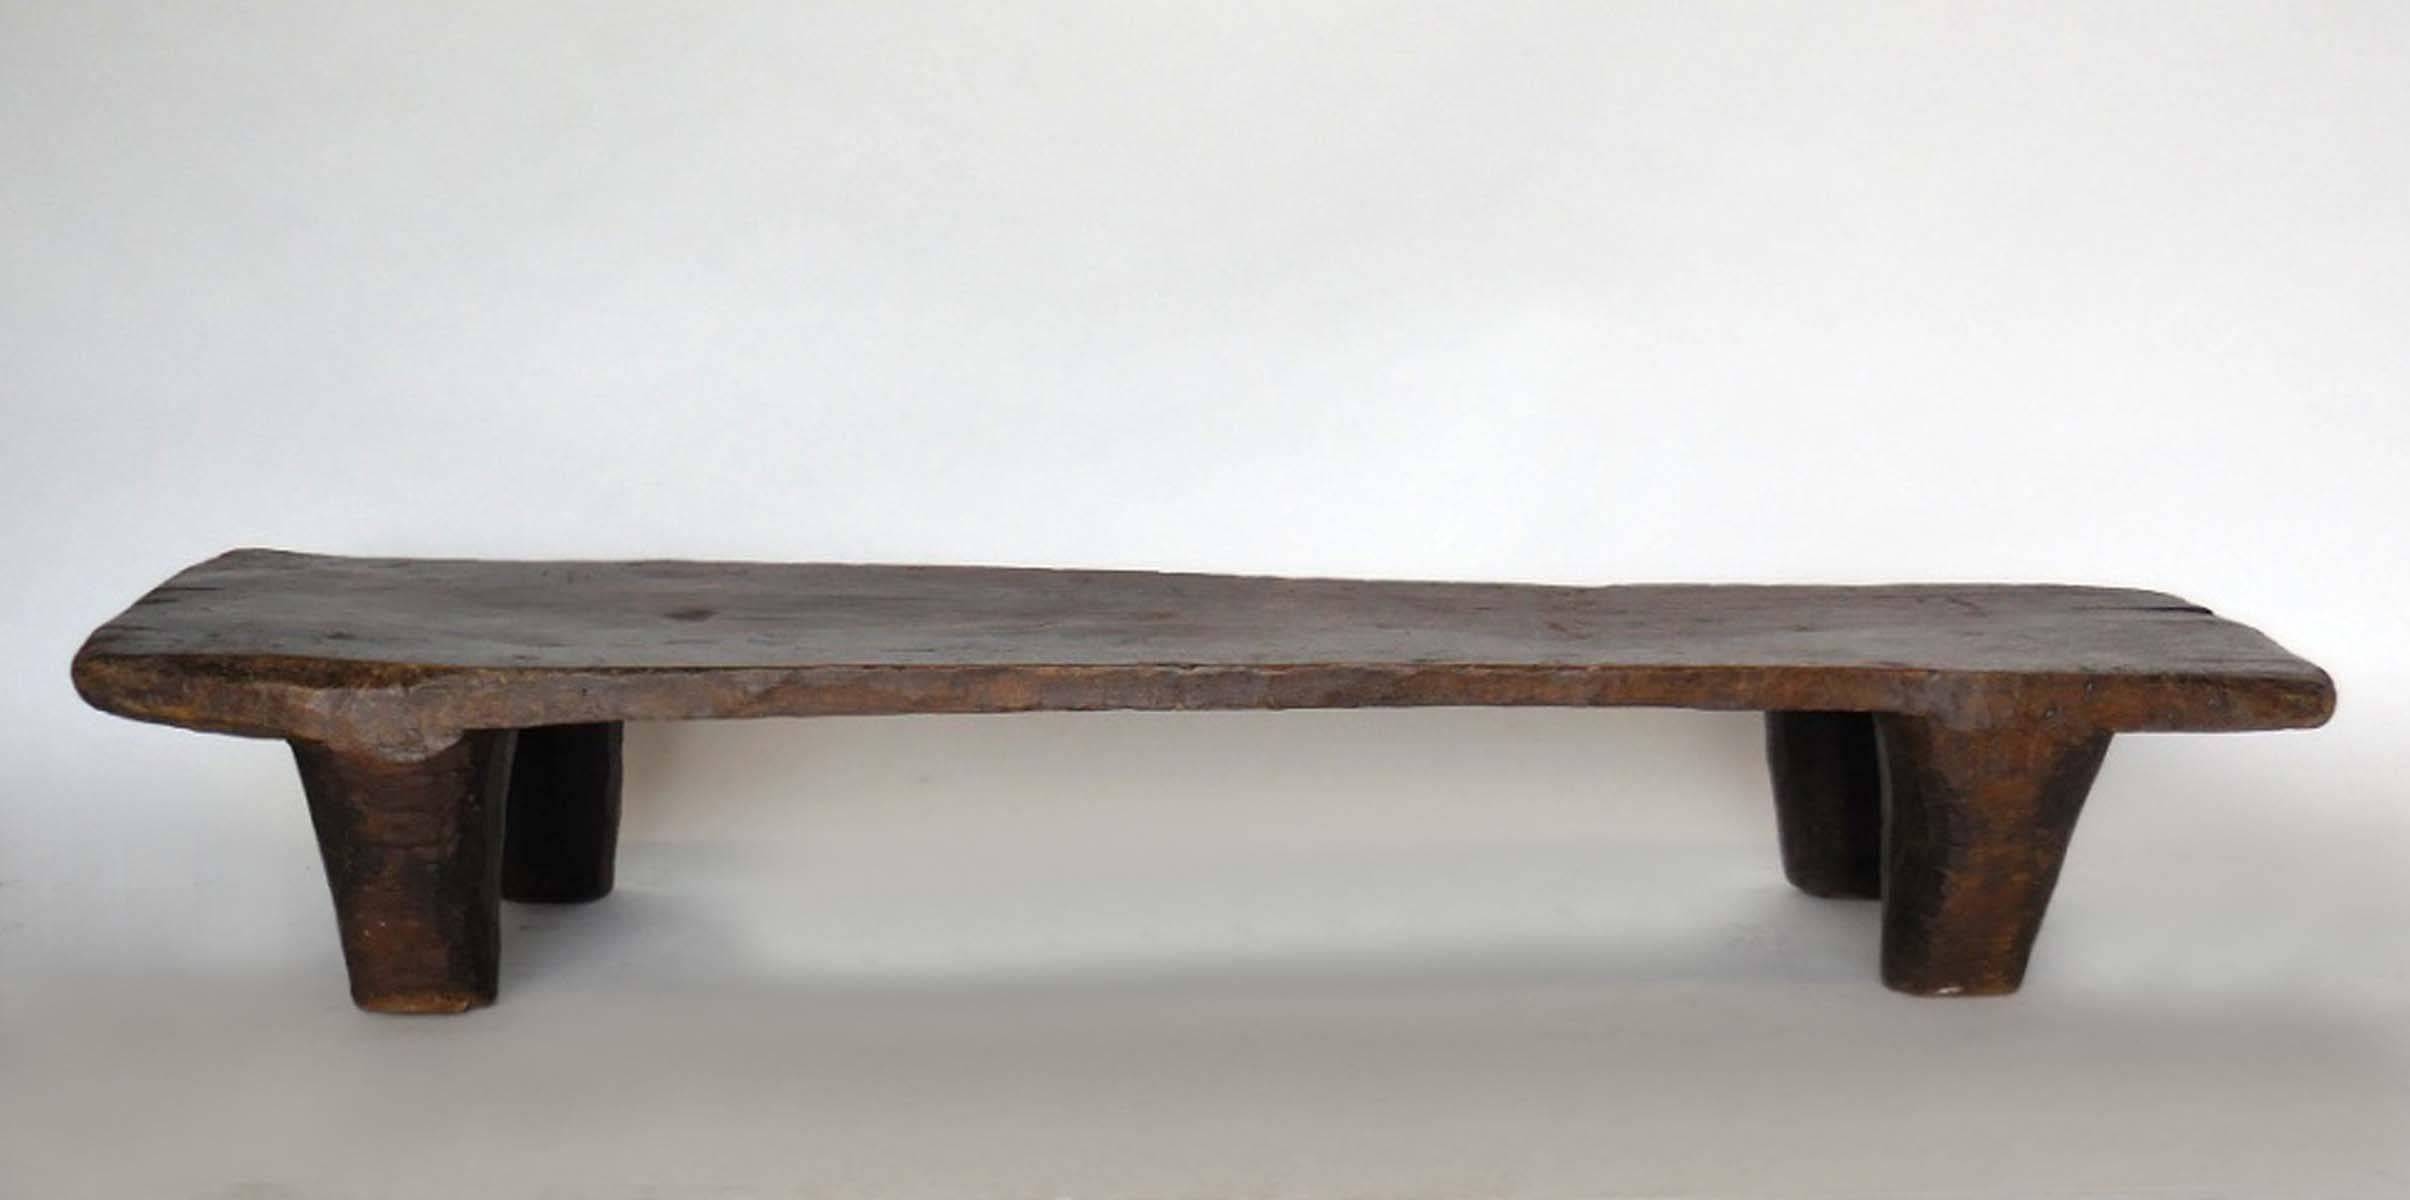 Primitive early 20th century Nupe bed for a child. Carved out of one piece of wood with conical shaped legs and a smooth flat surface on top. Measure: The height varies from 9.25 to 11.5 inches. Nupe tribe, Northern Nigeria.